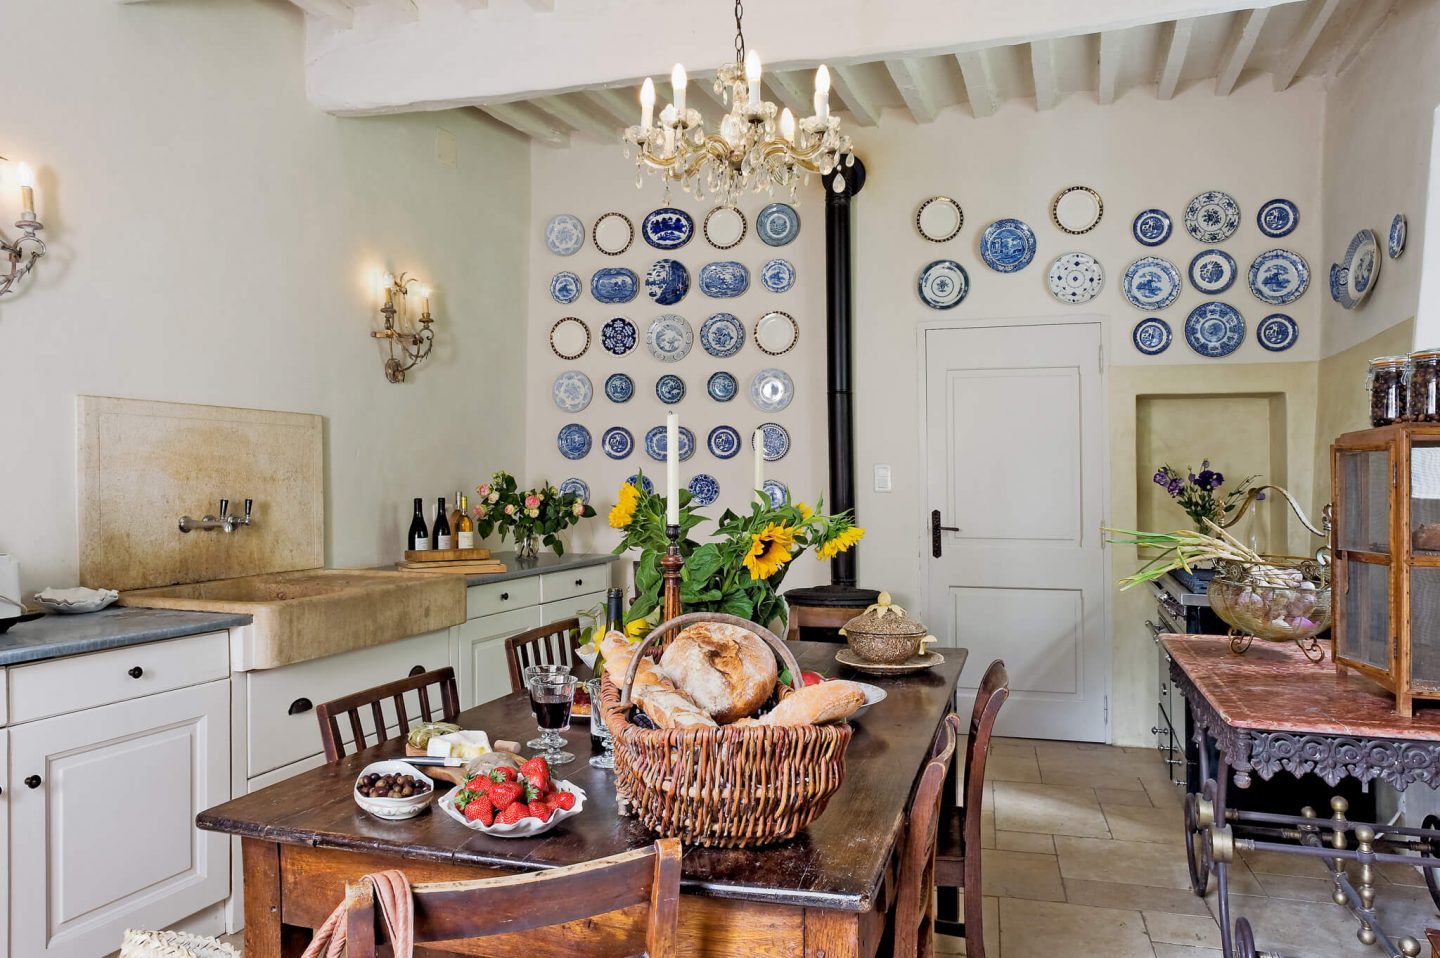 Beautiful French country house in Provence. Come tour Provence Villa St-Saturnin: Timeless & Tranquil Design...the interiors have authentic and classic French style and this luxury vacation rental can be booked through Haven In. #frenchcountry #houseinfrance #bastide #frenchfarmhouse #housetour #provence #provencal #havenin #europeancountry